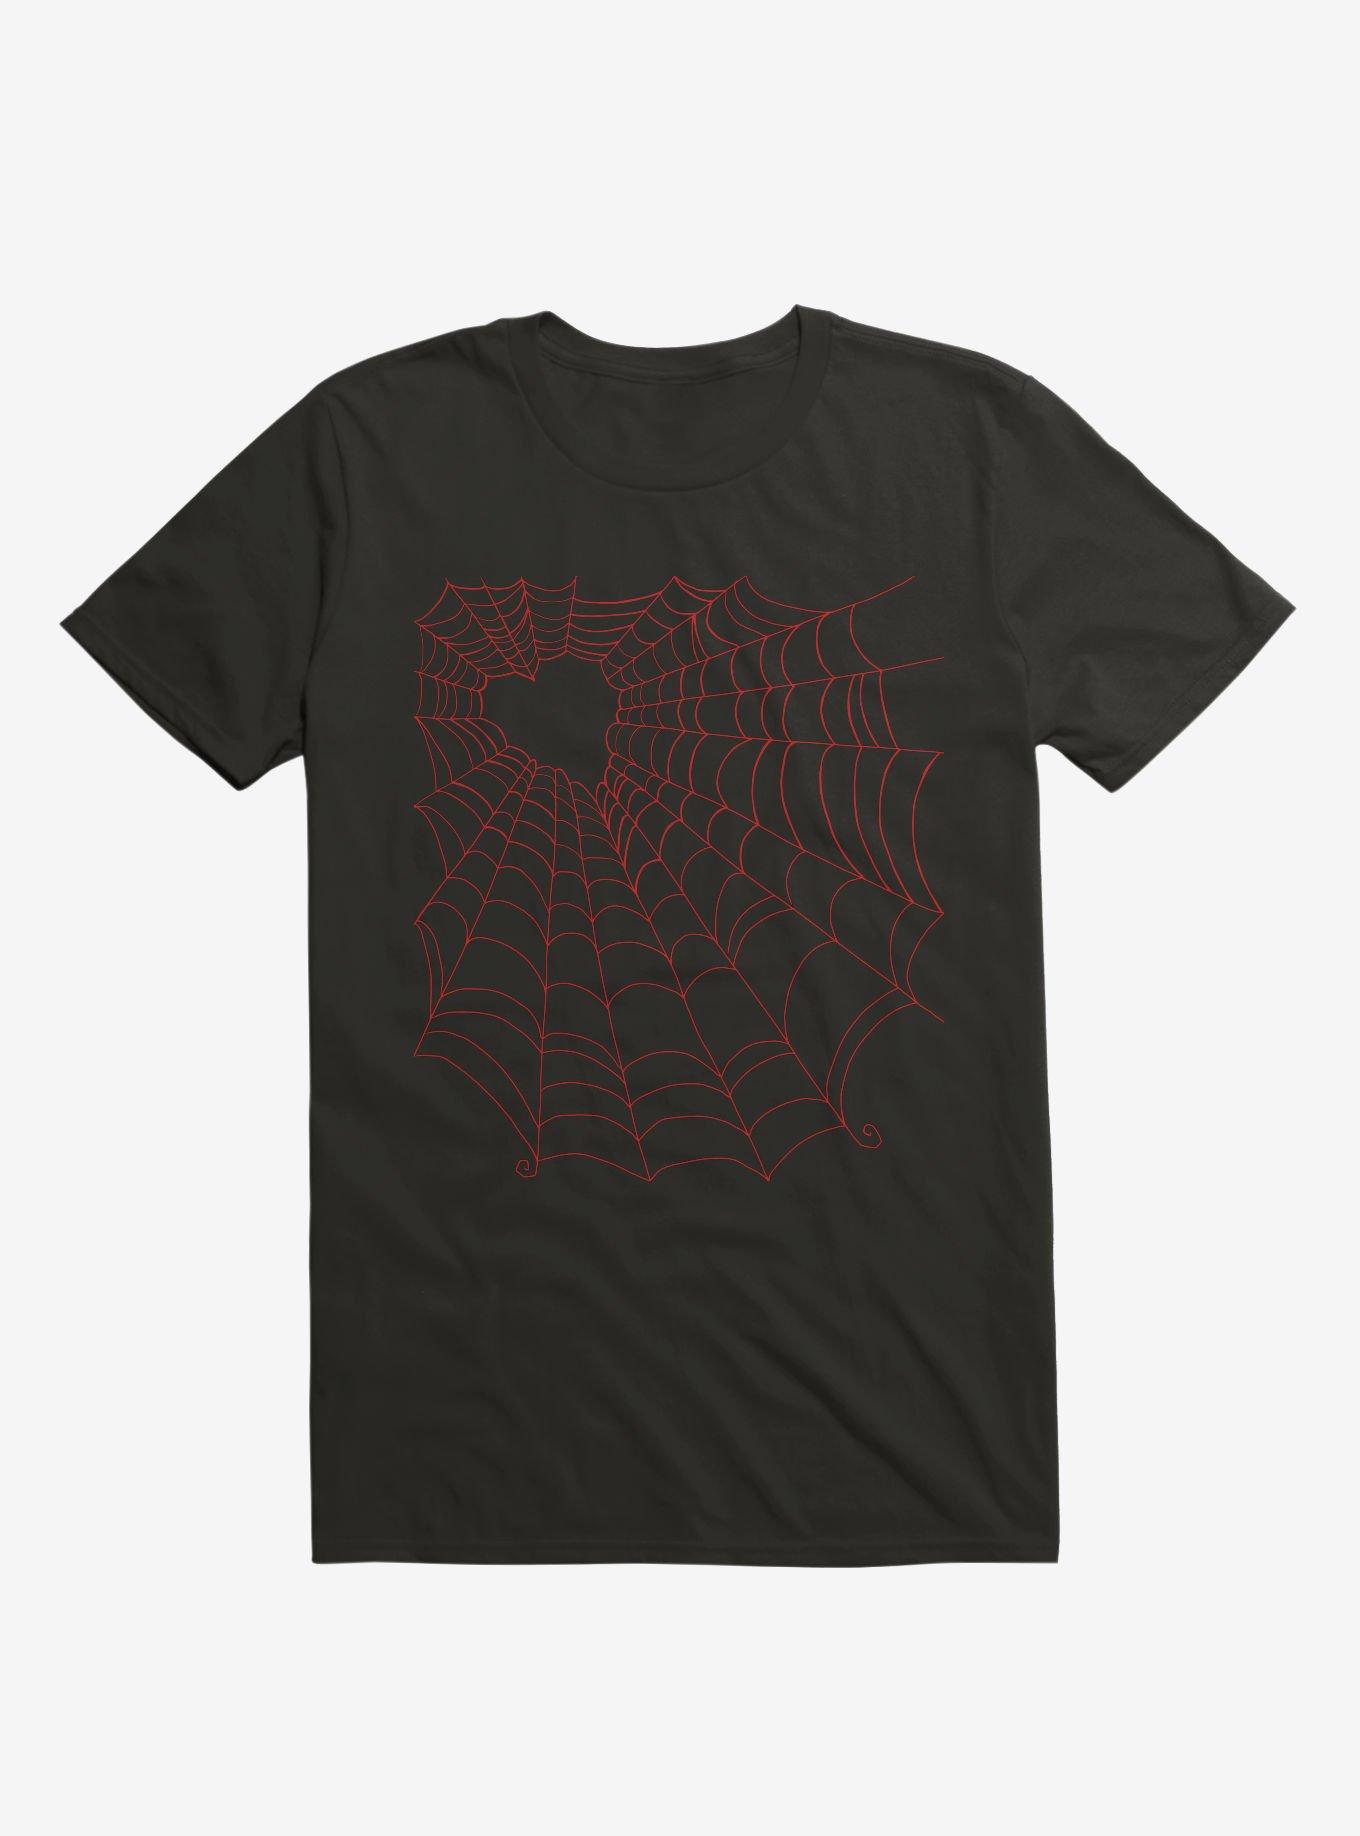 Caught You In My Red Hearted Web Black T-Shirt, BLACK, hi-res